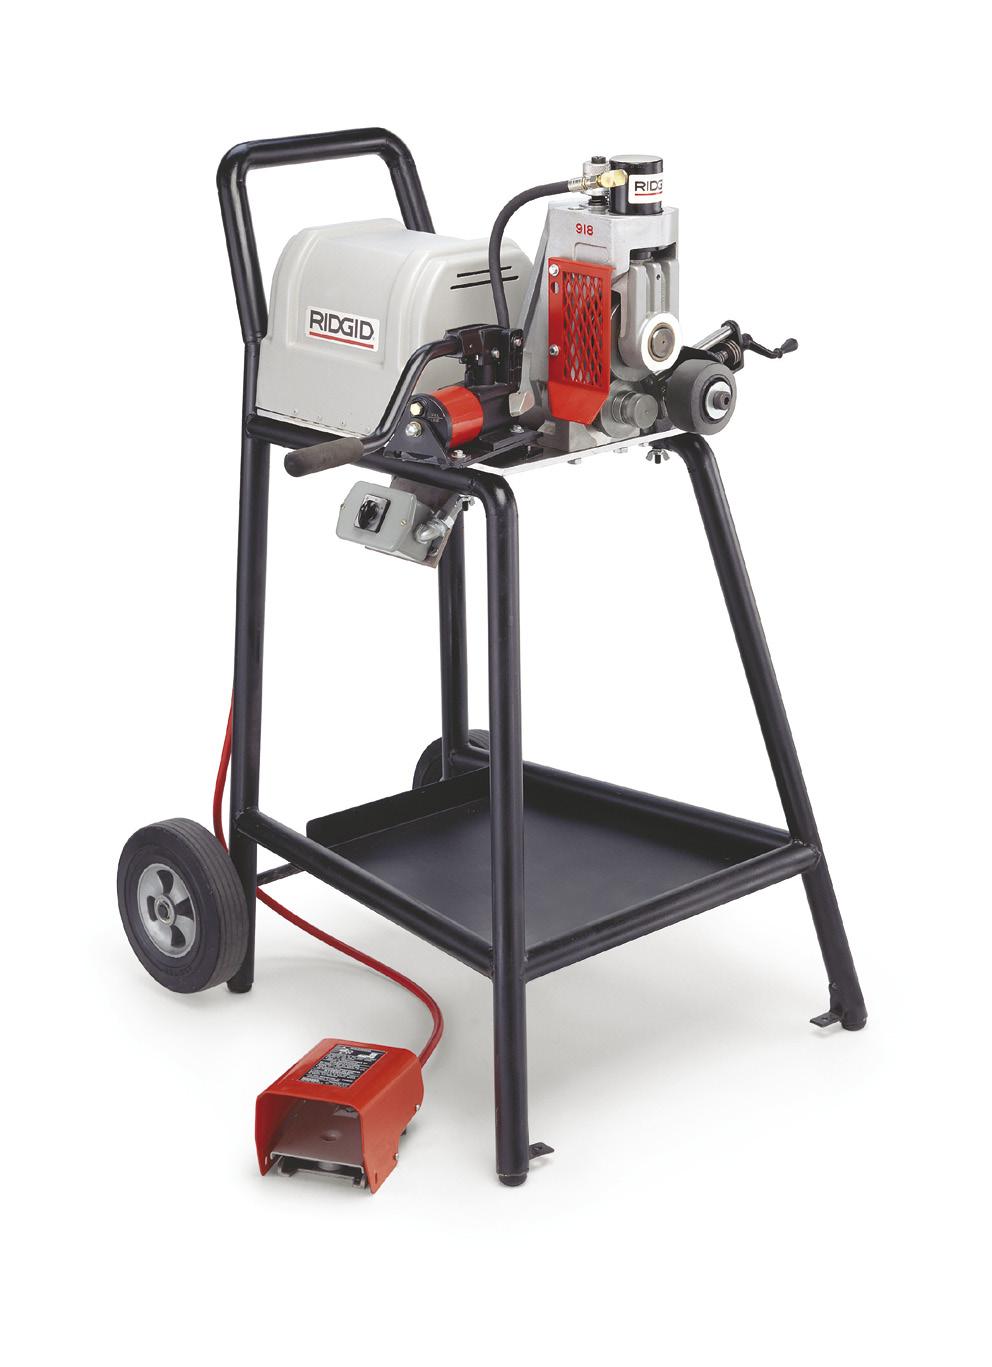 Model 918-I Roll Groover The RIDGID Model 918-I Roll Grooving Machine is capable of grooving 1" to 8" Schedule 40 and 1" to 12" Schedule 10 pipe faster than any roll grooving machine in its class.